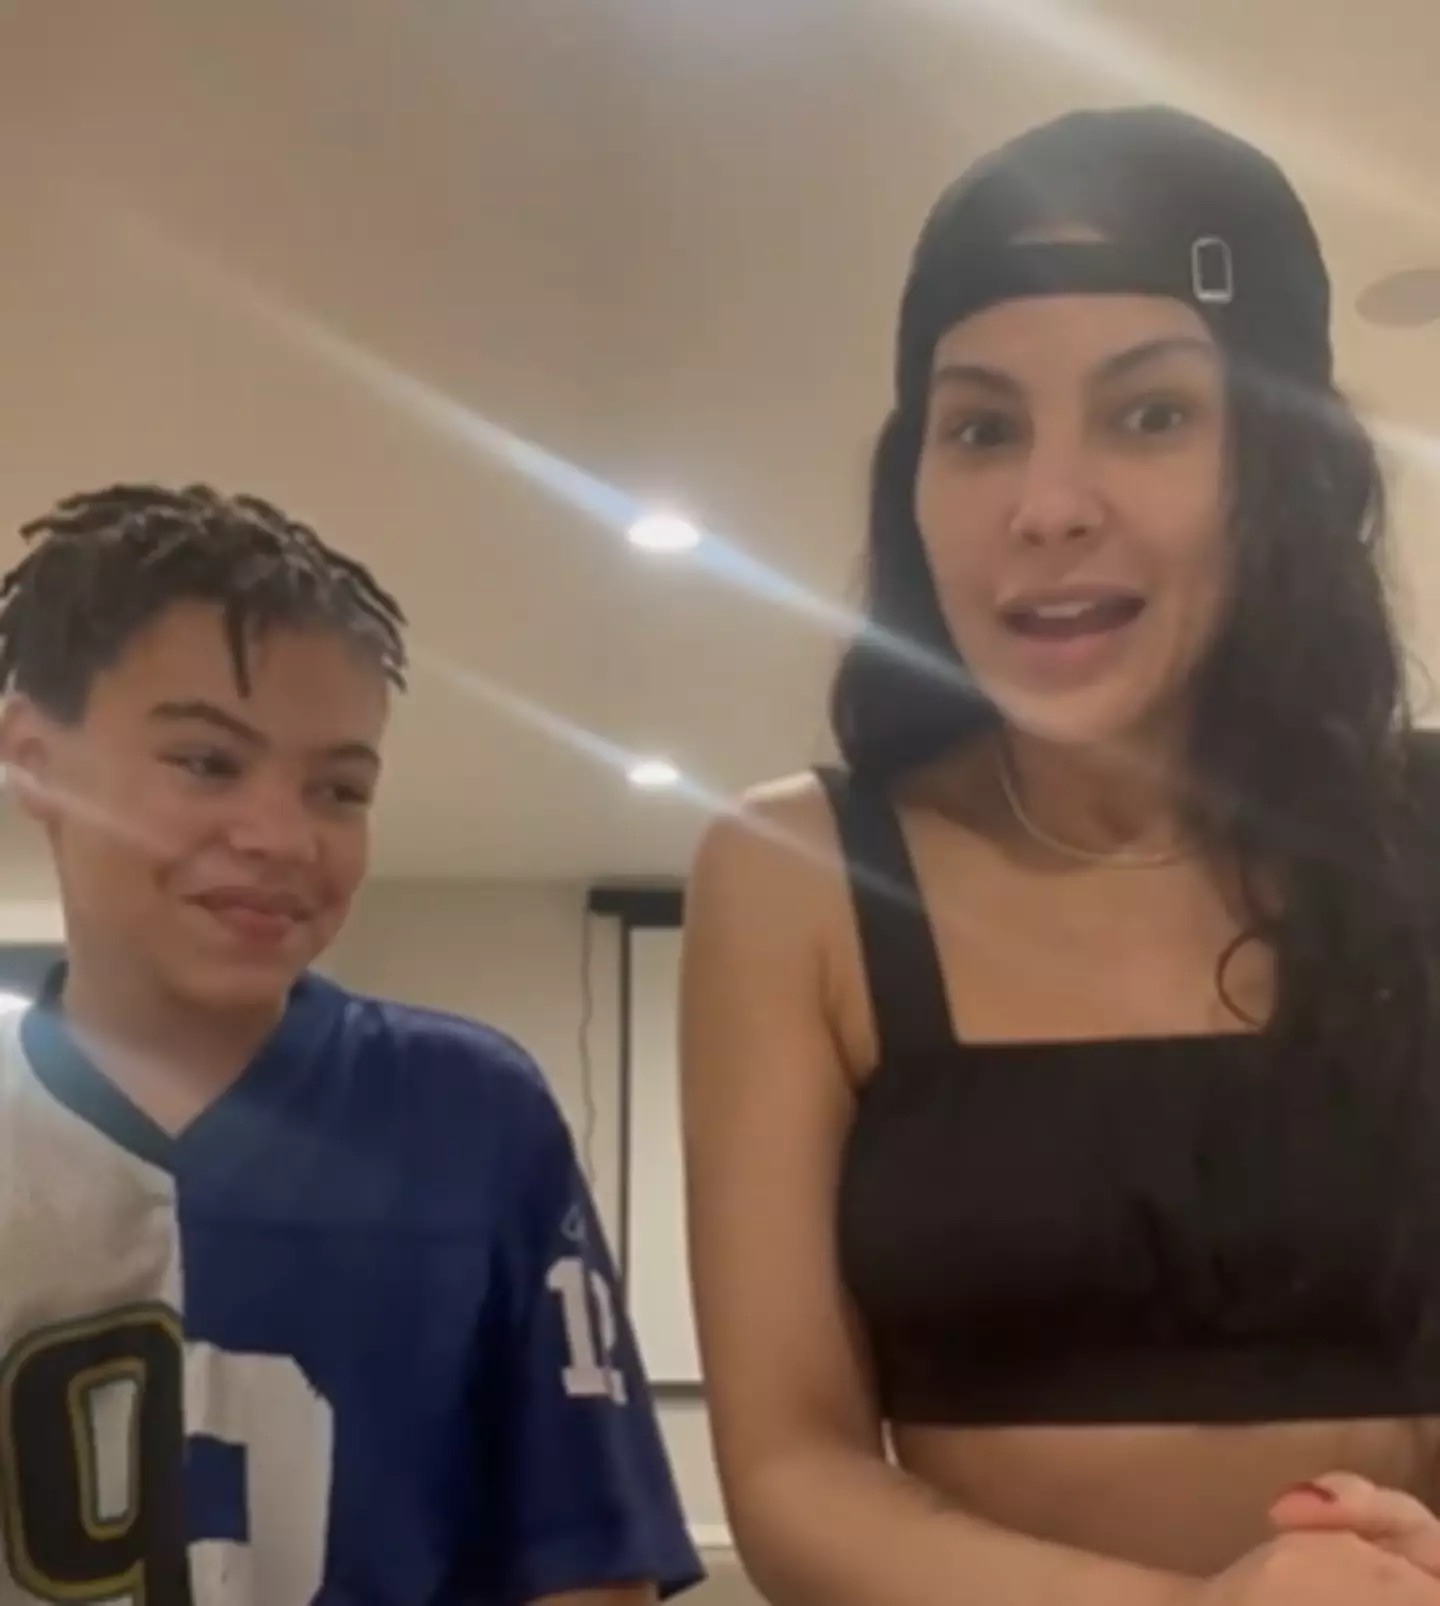 Amanza says she last saw the children's father back in 2019 (